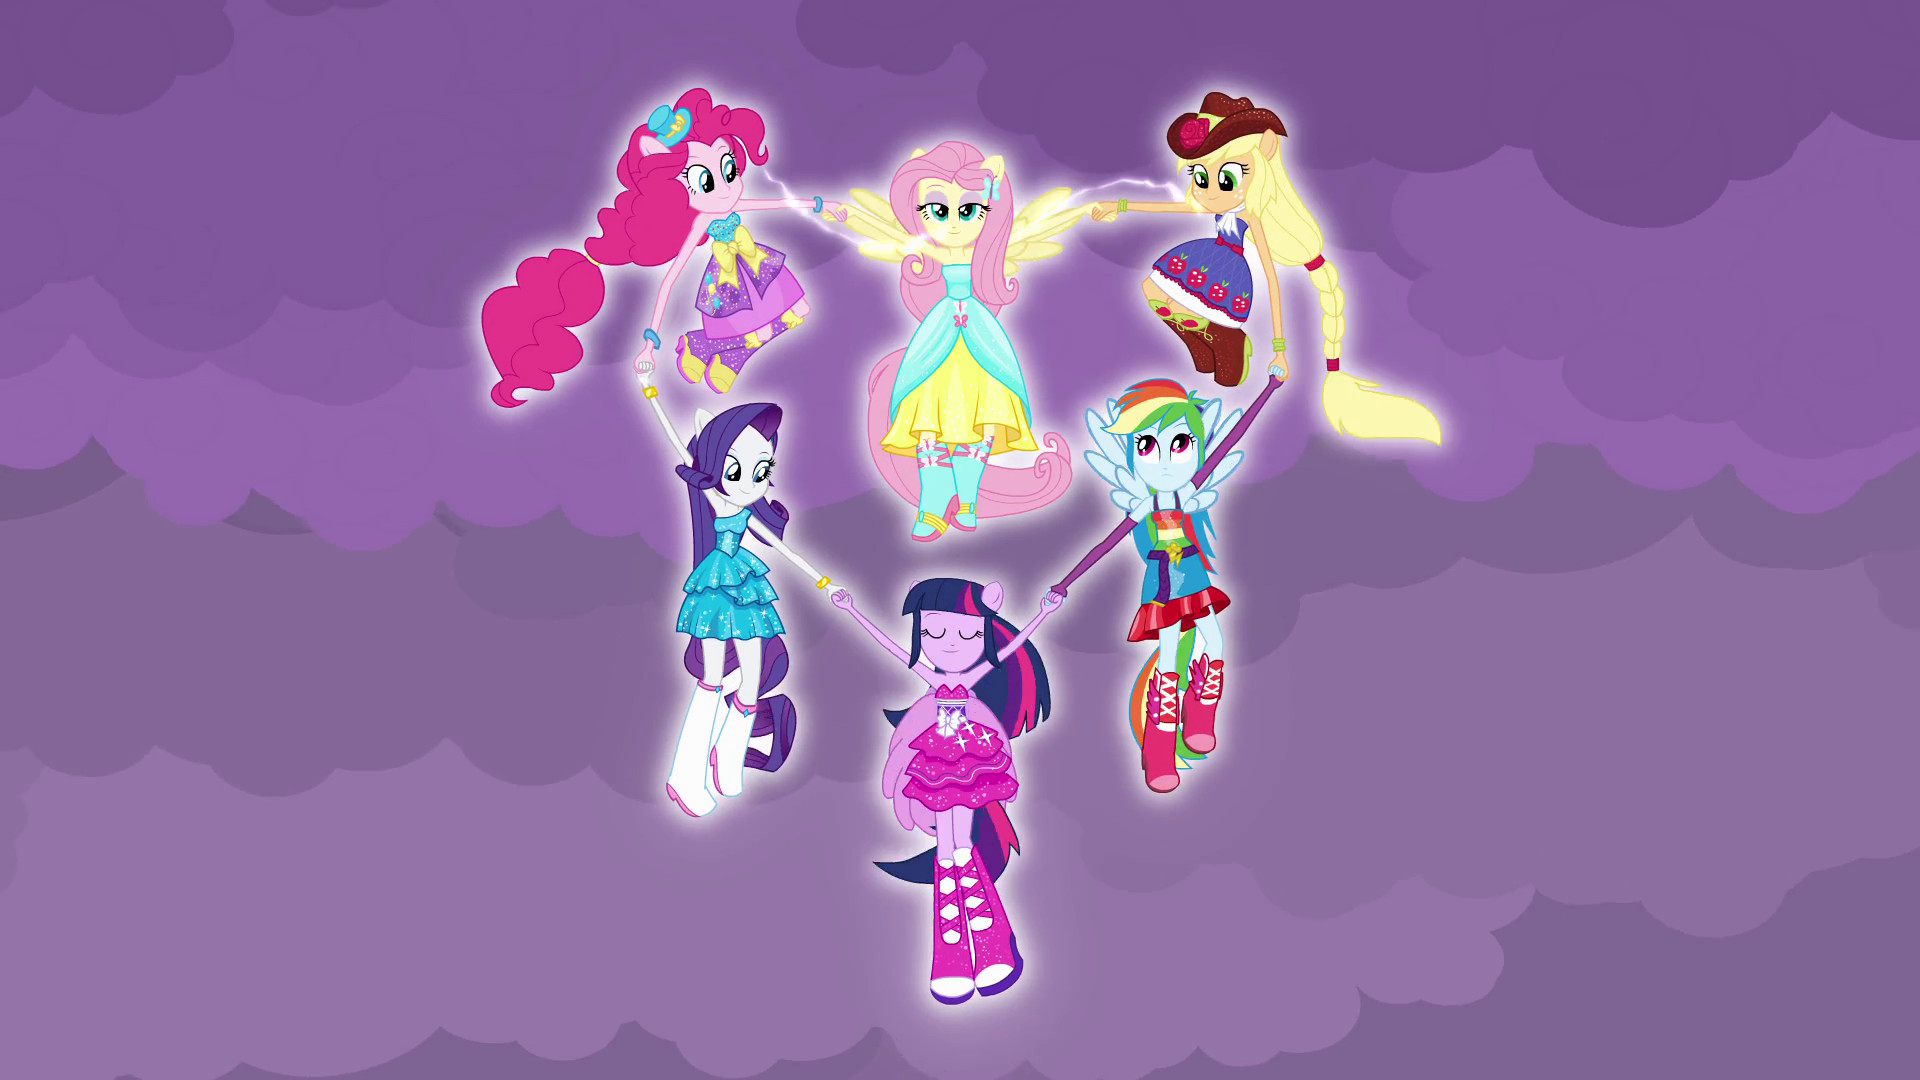 My Little Pony Equestria Girls Wallpapers 90 Images